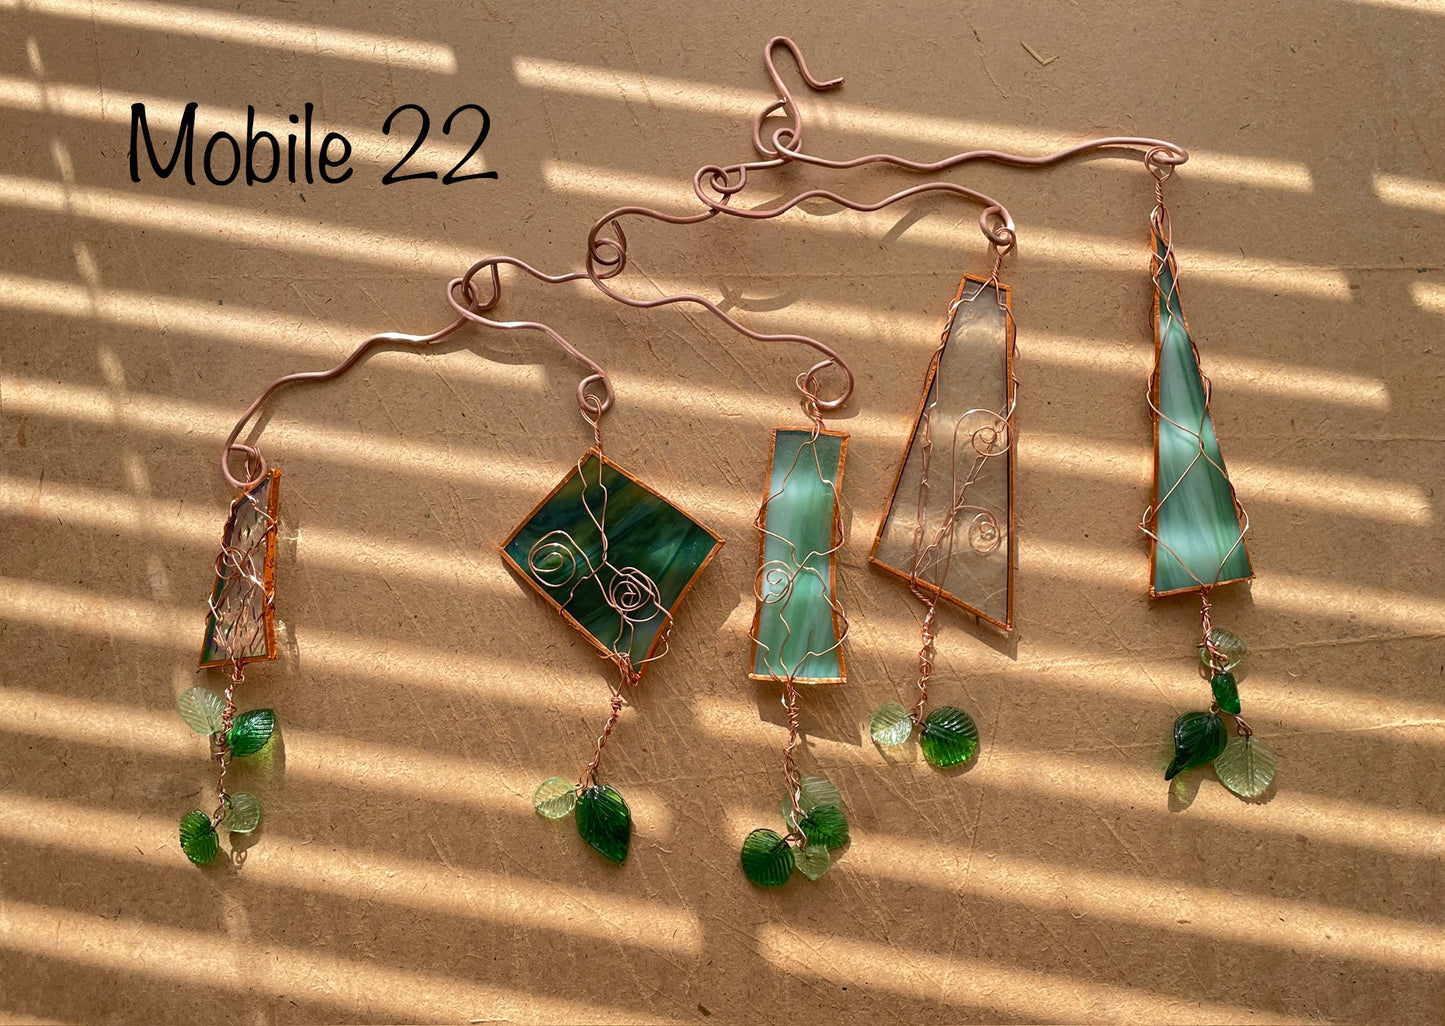 Green Stained Glass Mobile w/leaf charms Mobile22